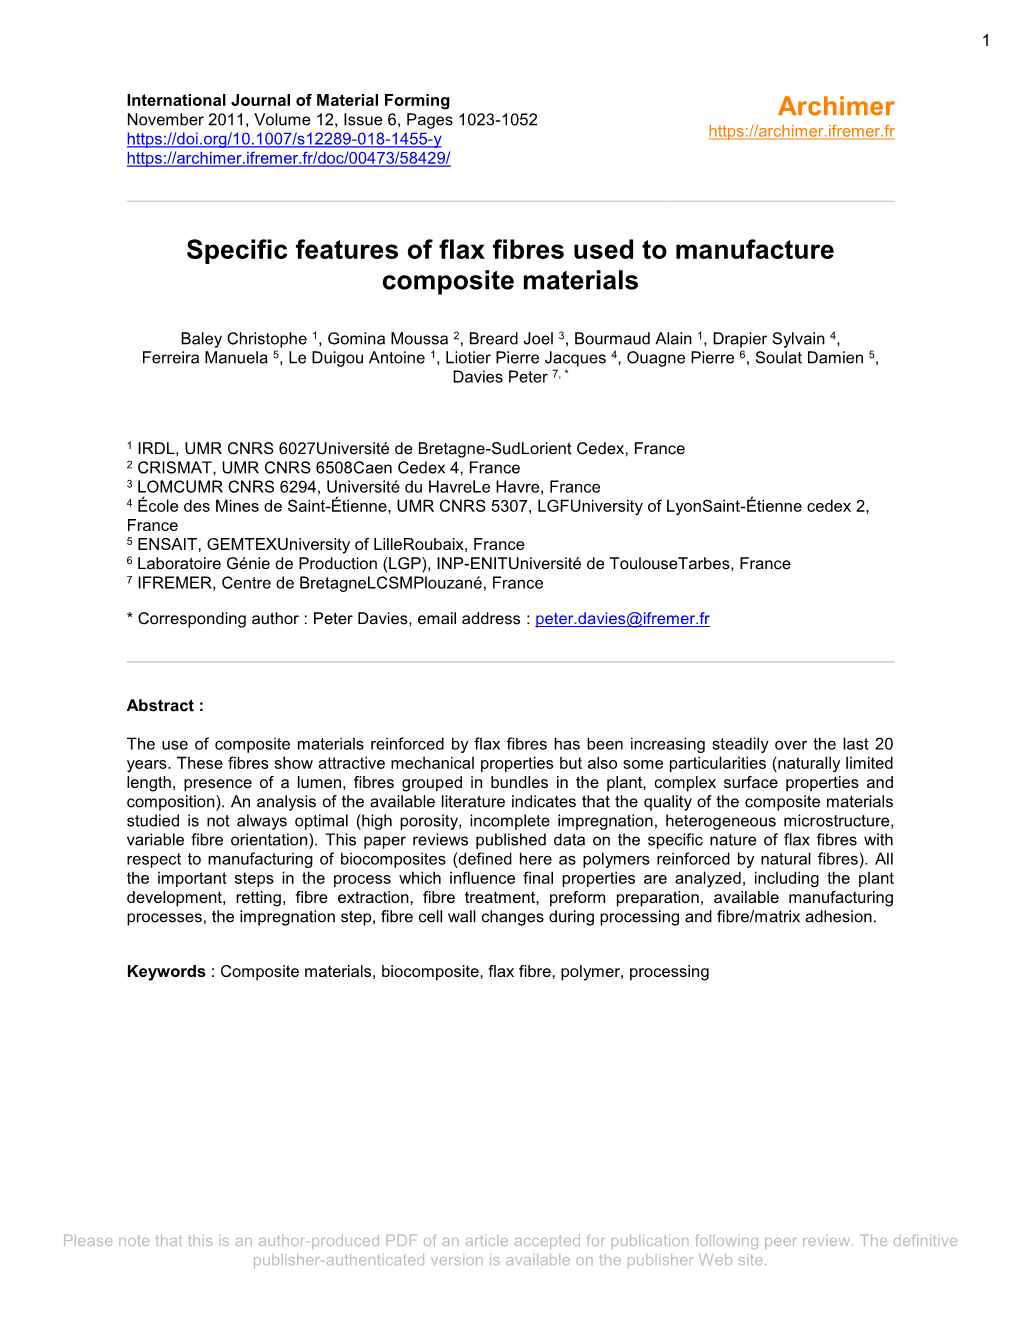 Specific Features of Flax Fibres Used to Manufacture Composite Materials